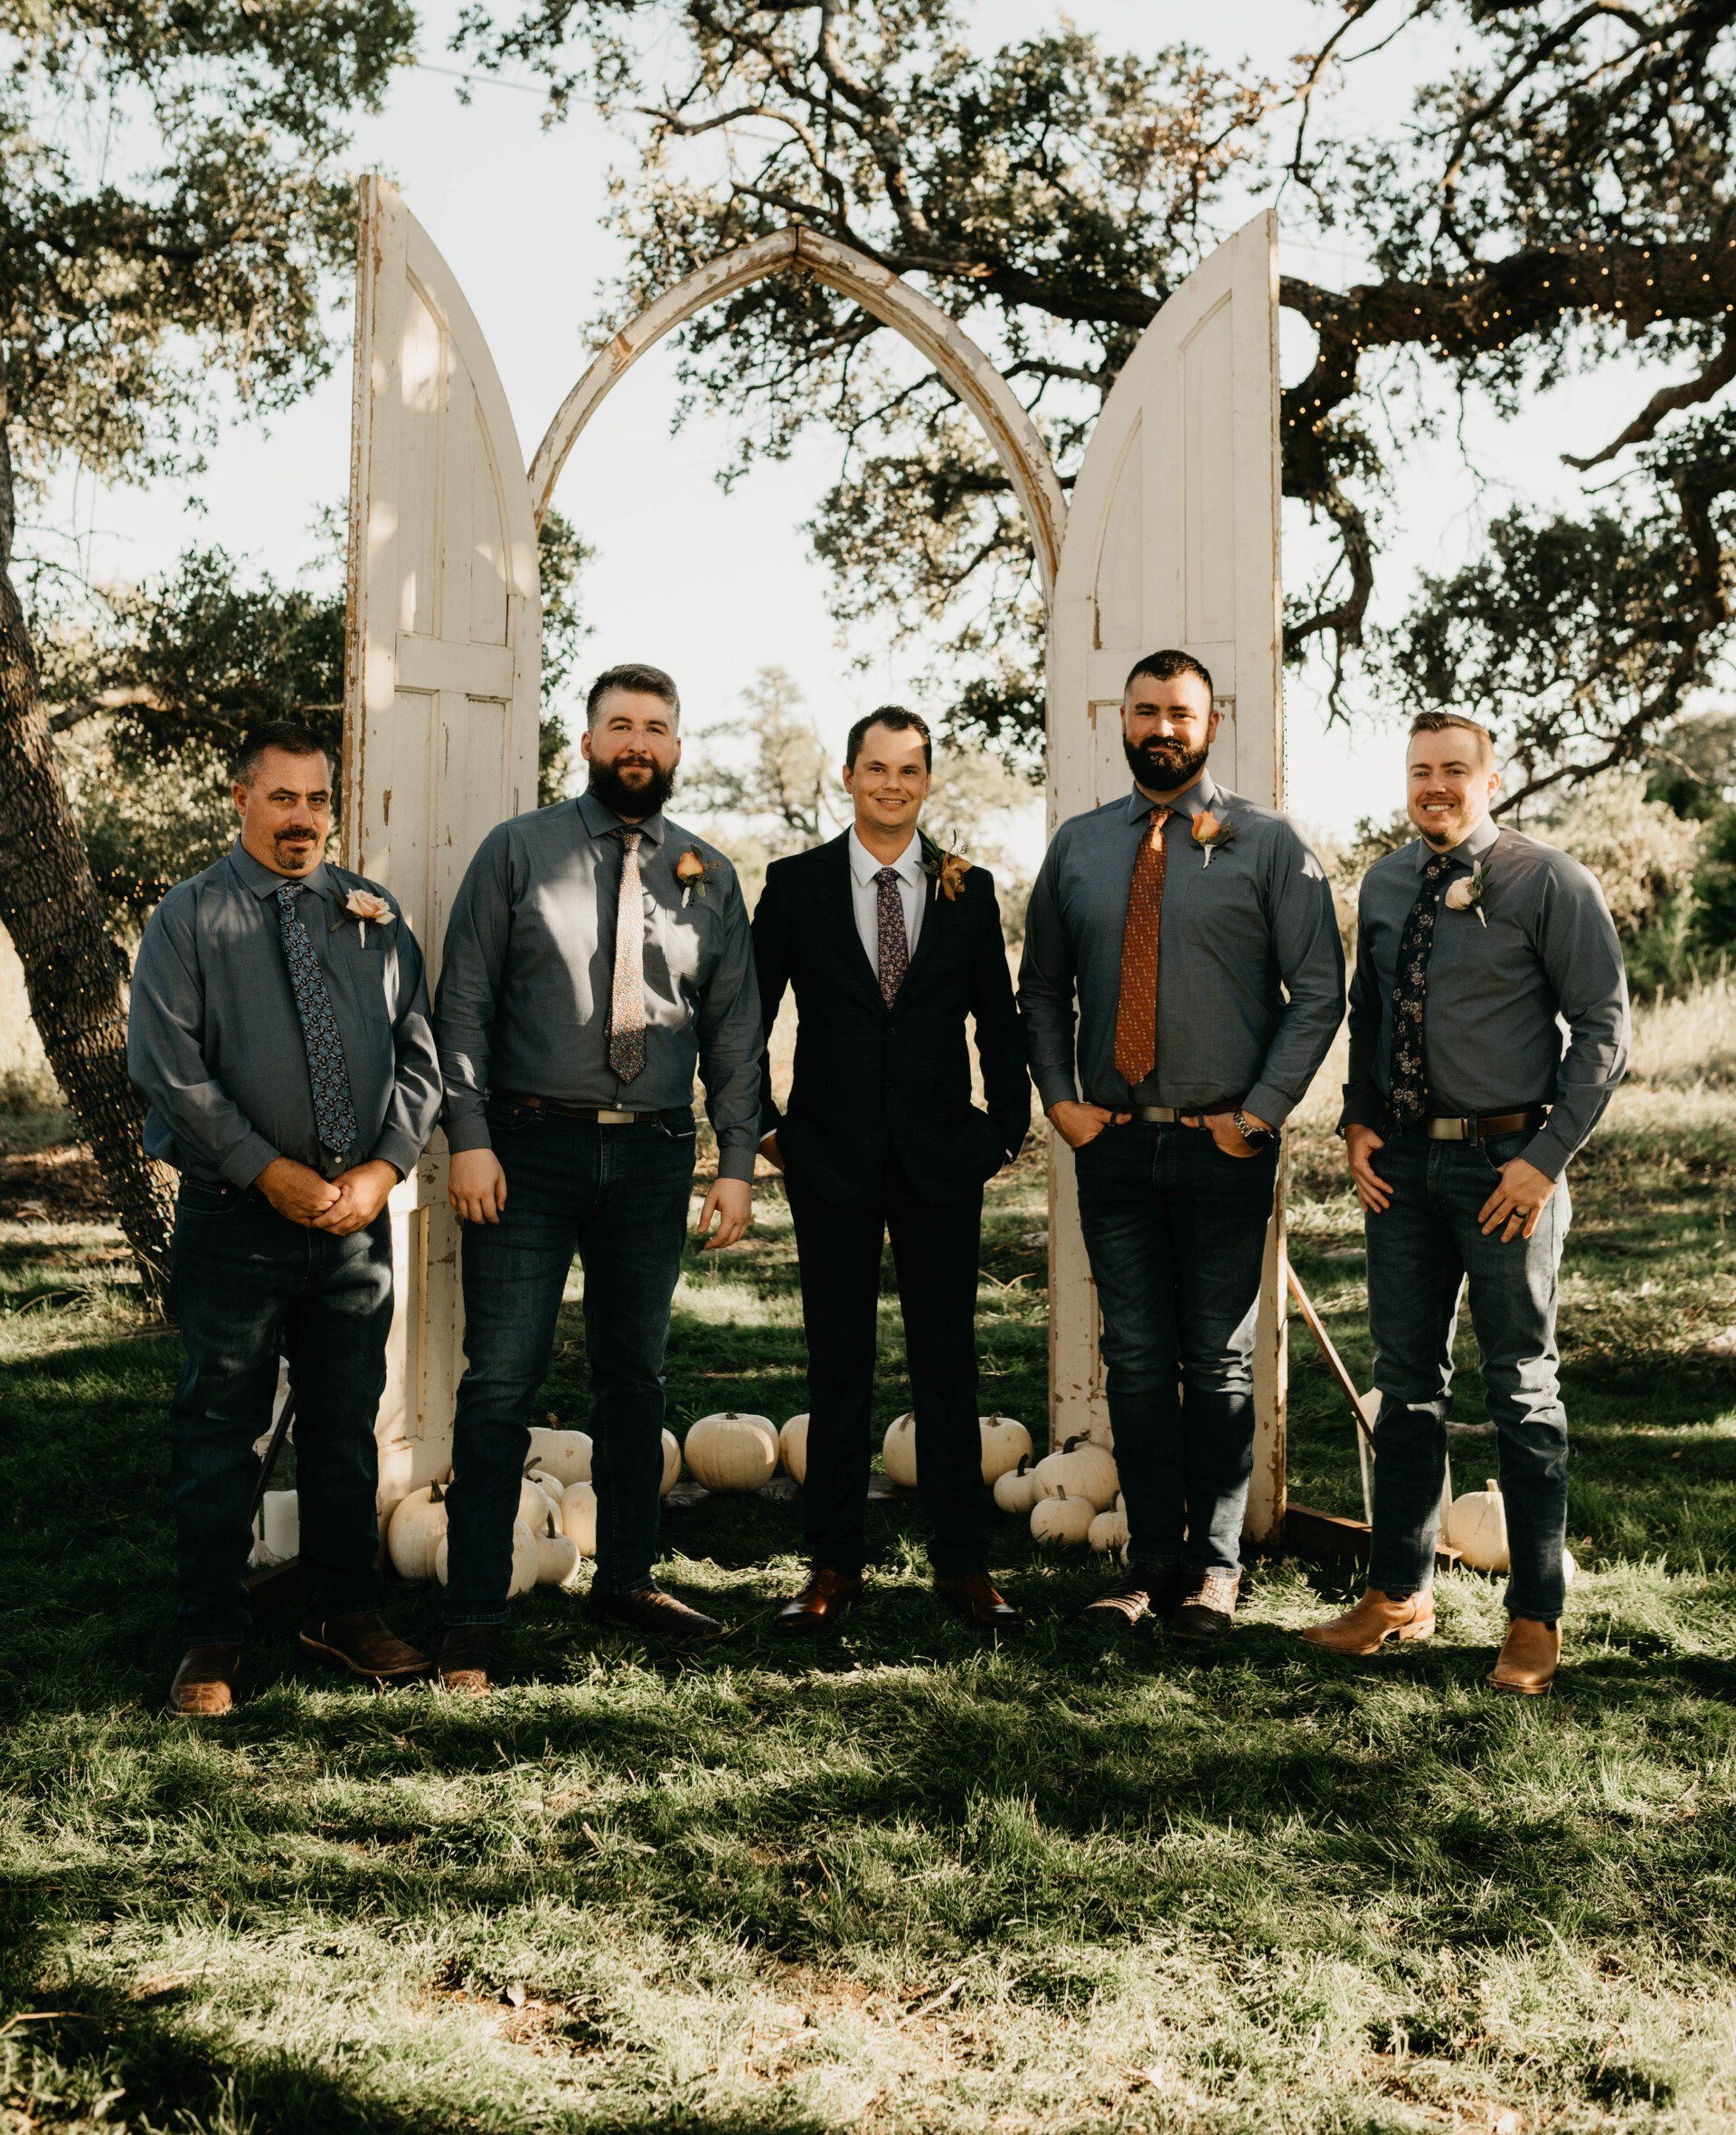 the groom and his groomsmen are posing for a picture